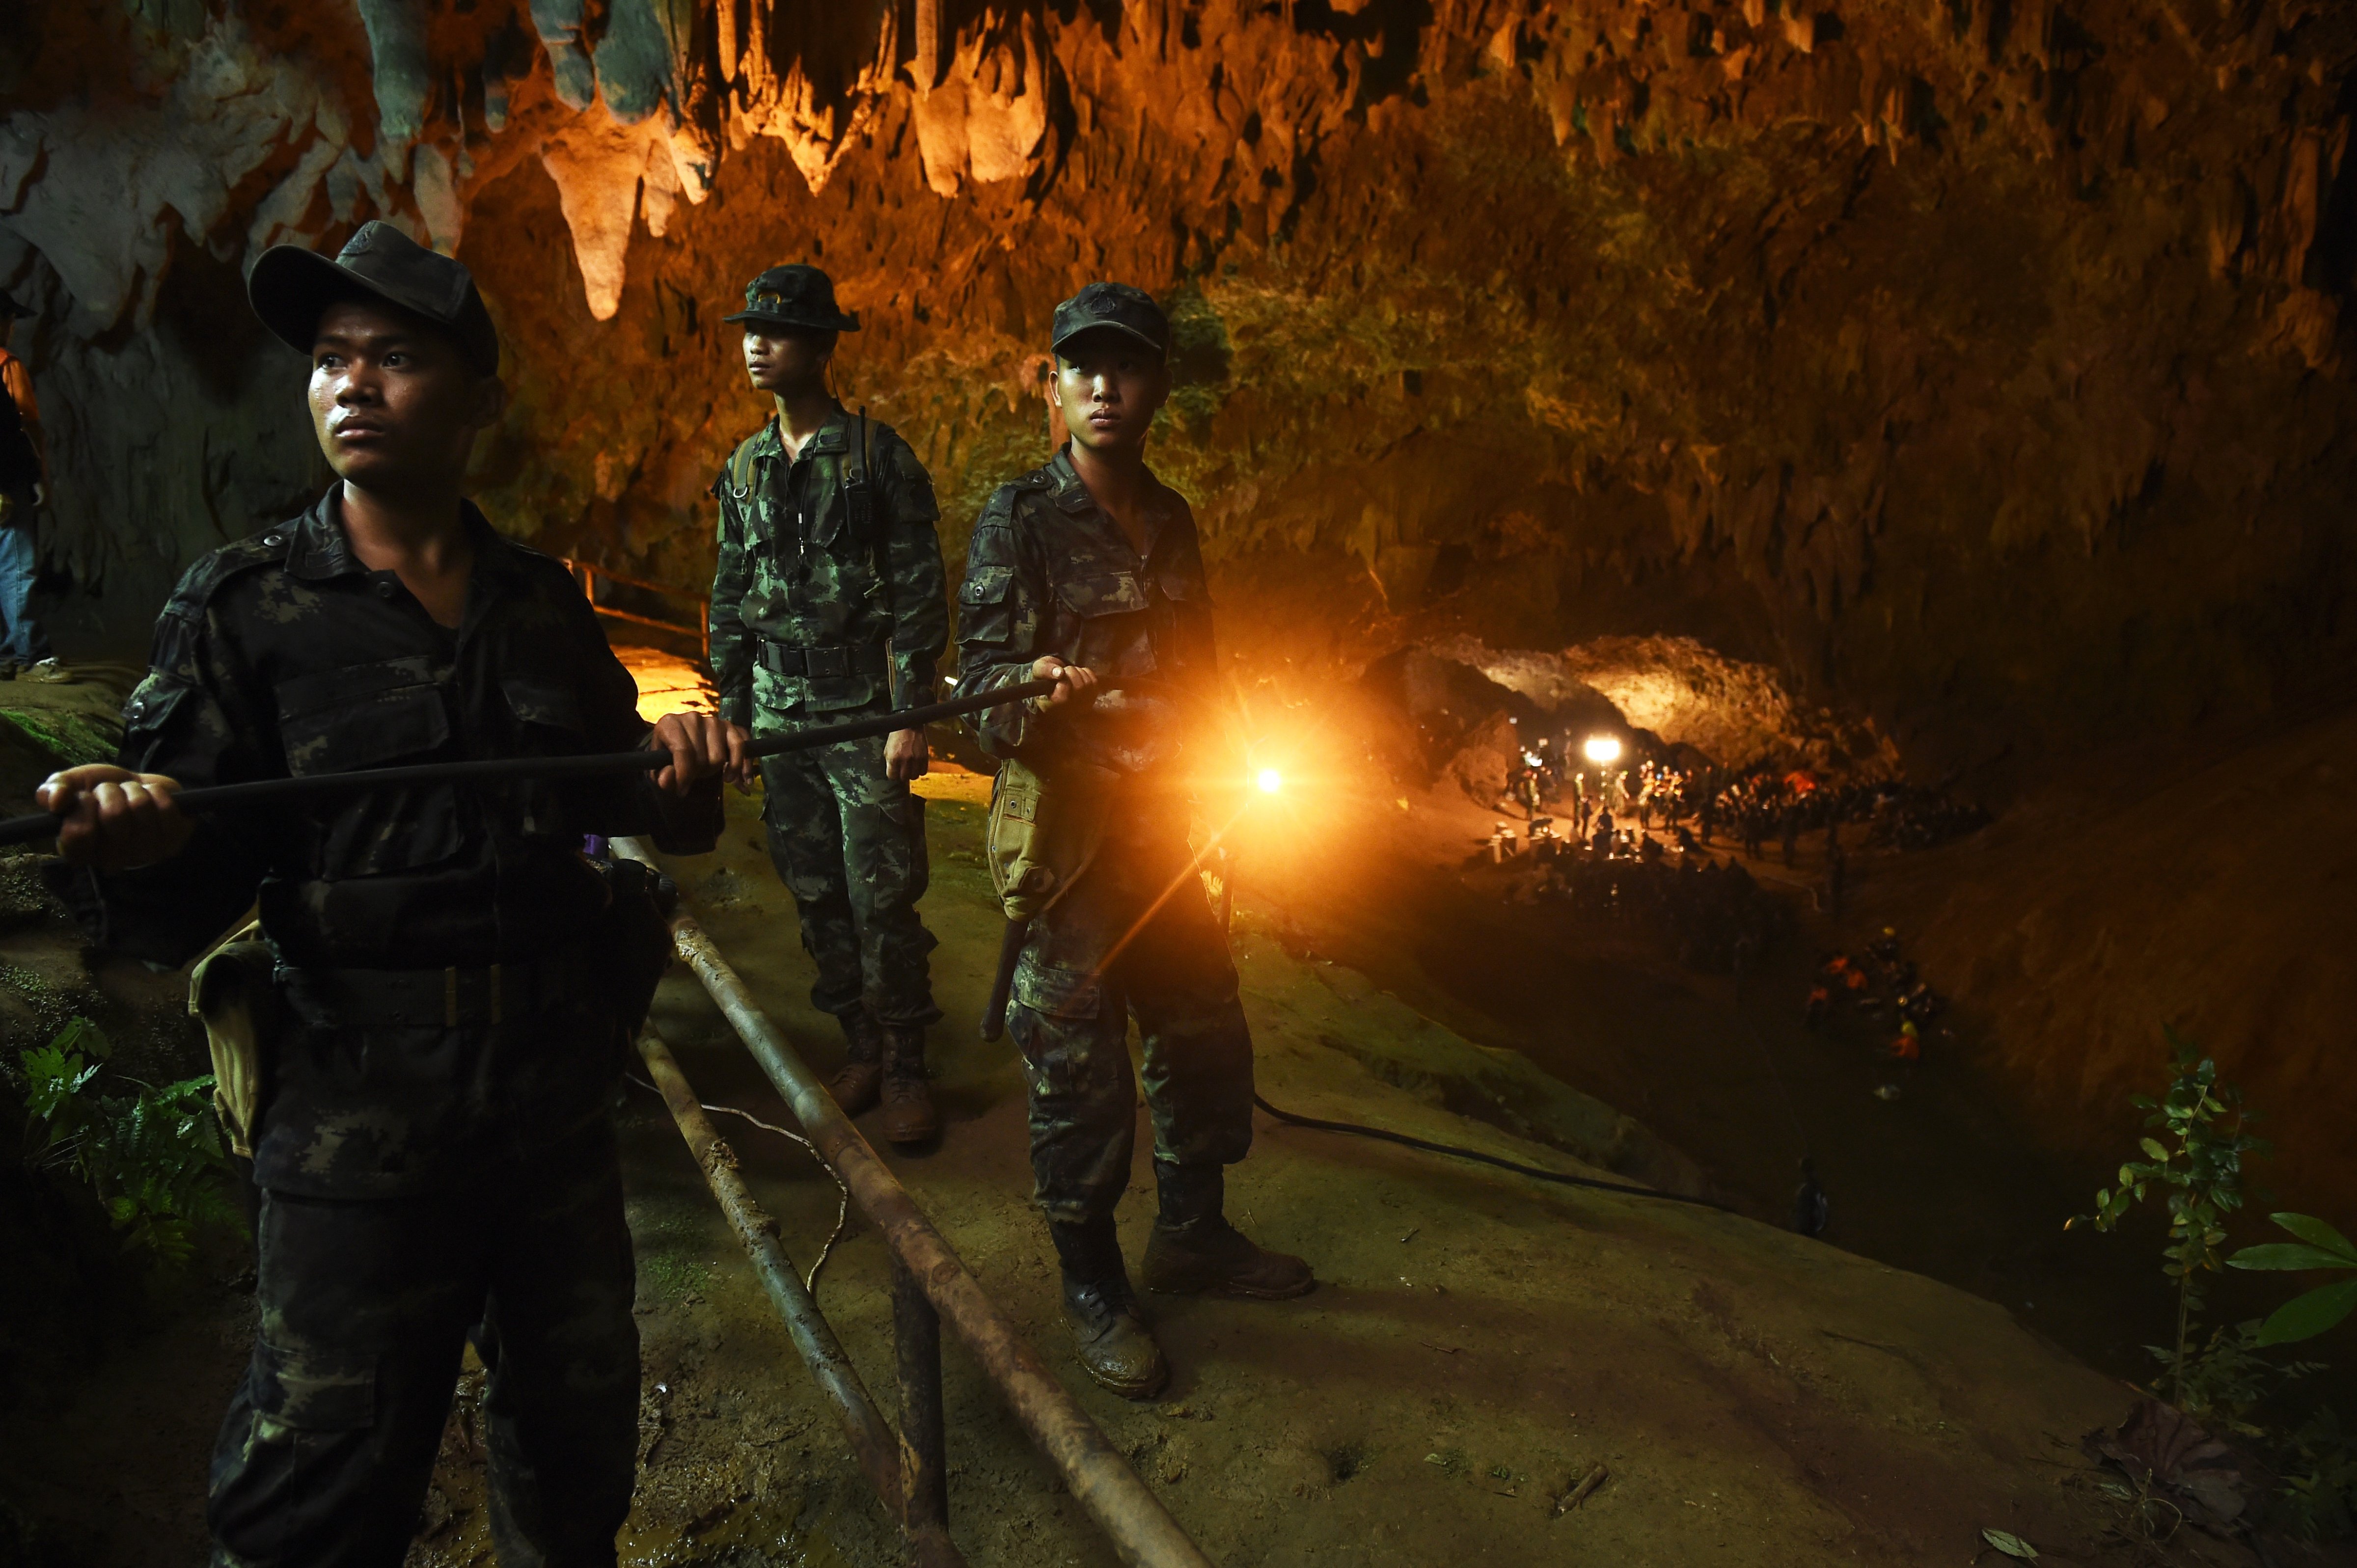 Thai soldiers relay electric cable deep into the Tham Luang cave at the Khun Nam Nang Non Forest Park in Chiang Rai on June 26, 2018. (Lillian Suwanrumpha—AFP/Getty Images)